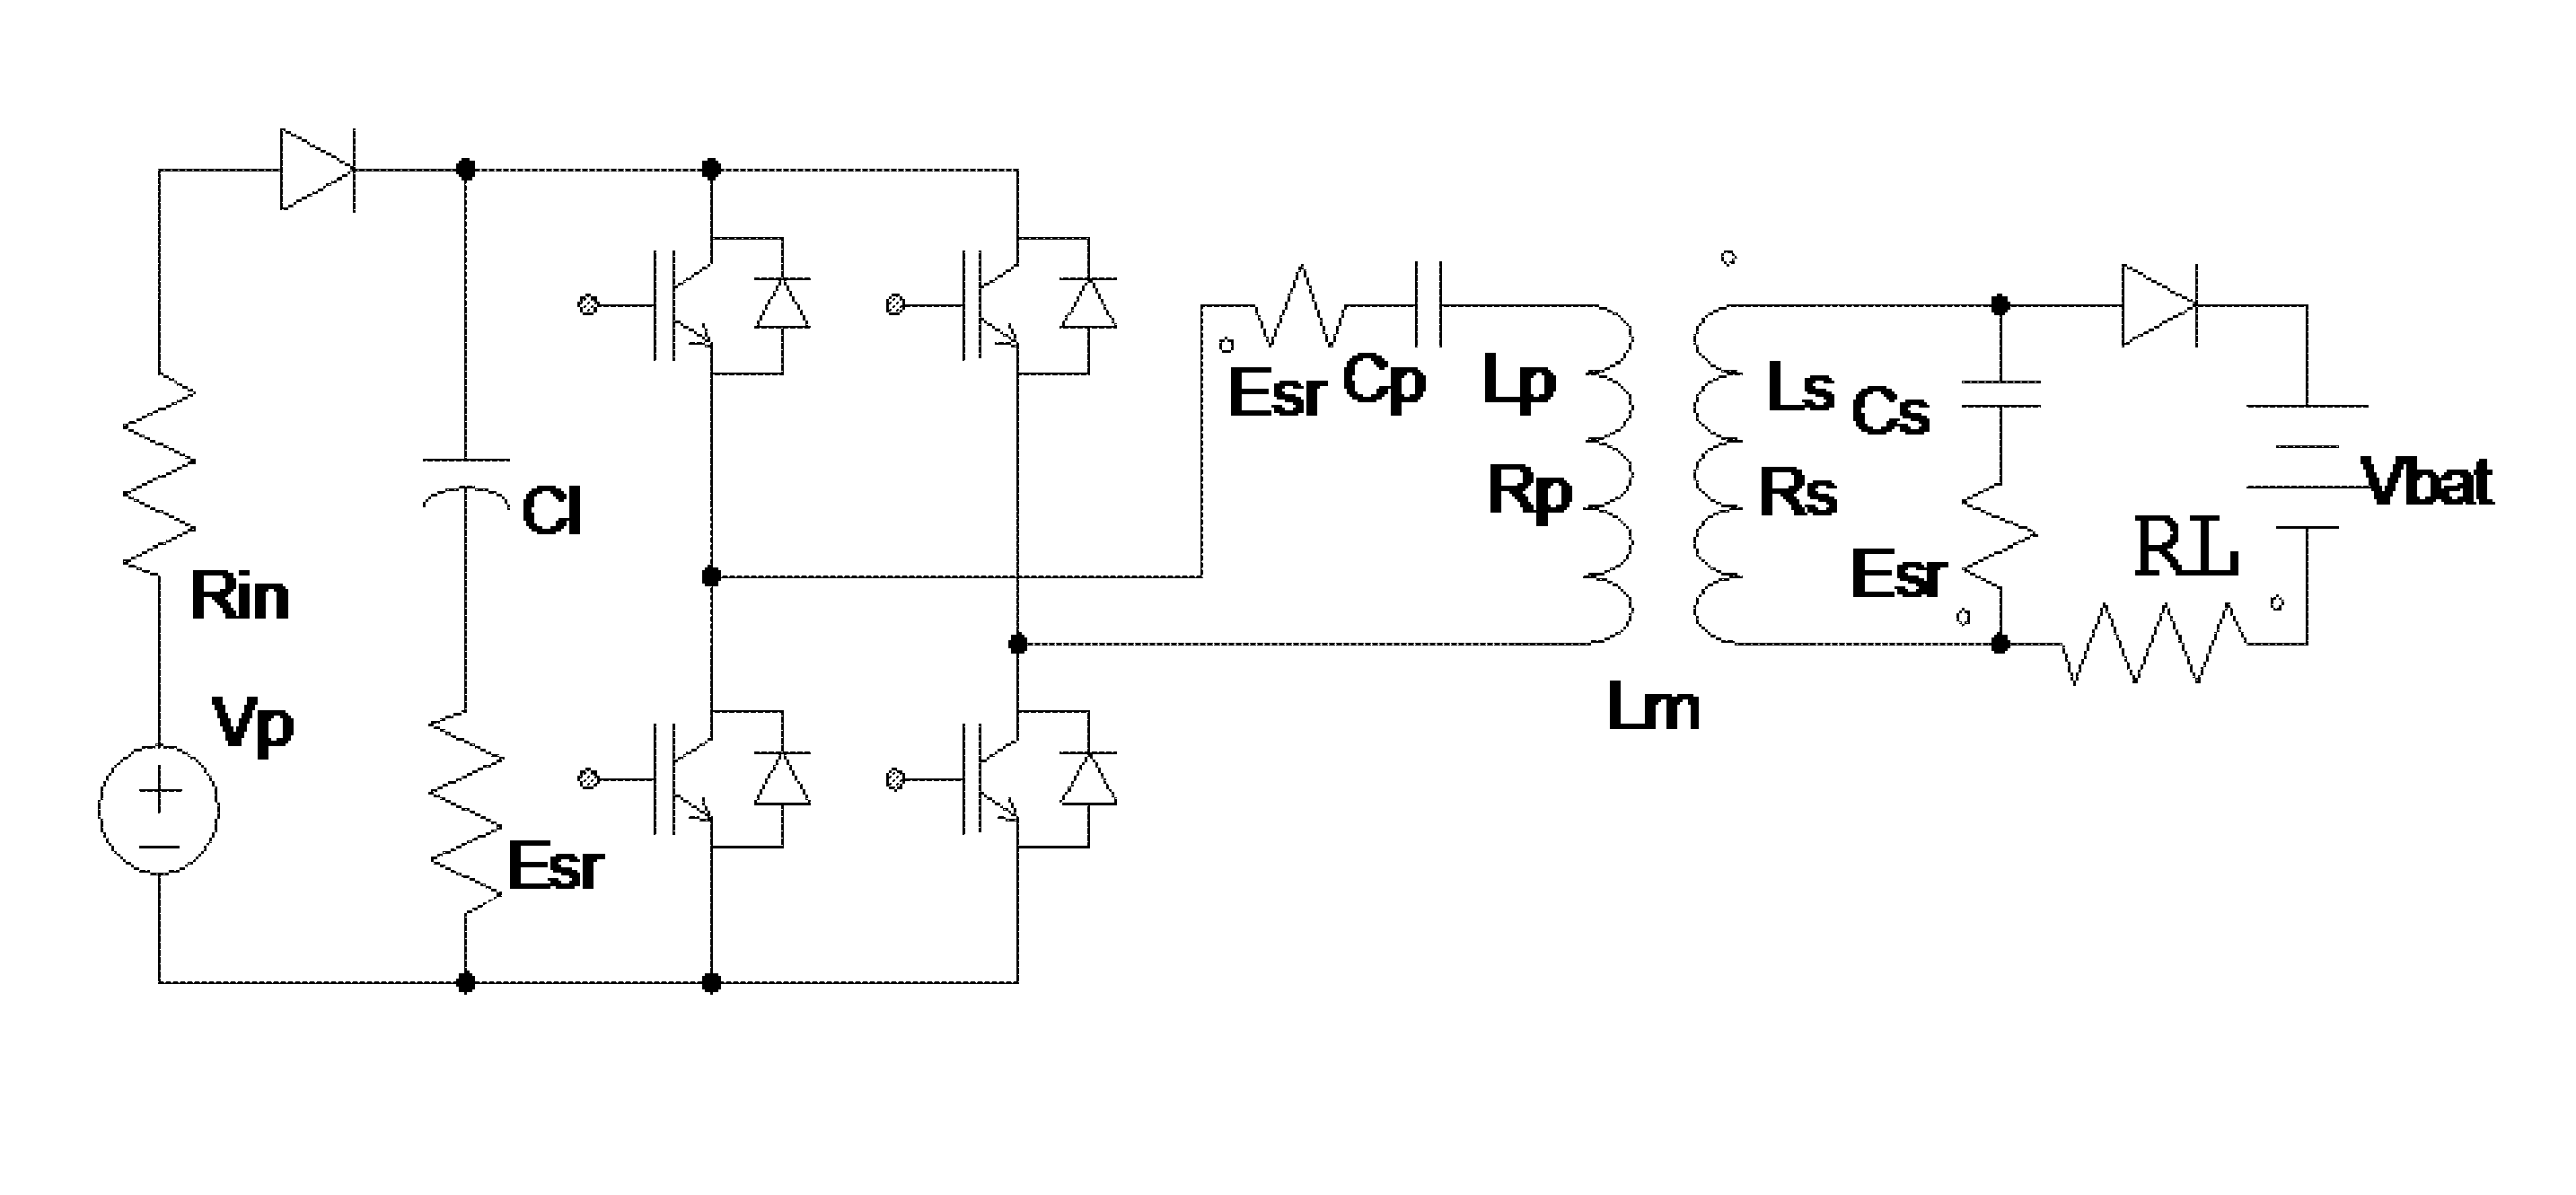 Off-resonance frequency operation for power transfer in a loosely coupled air core transformer